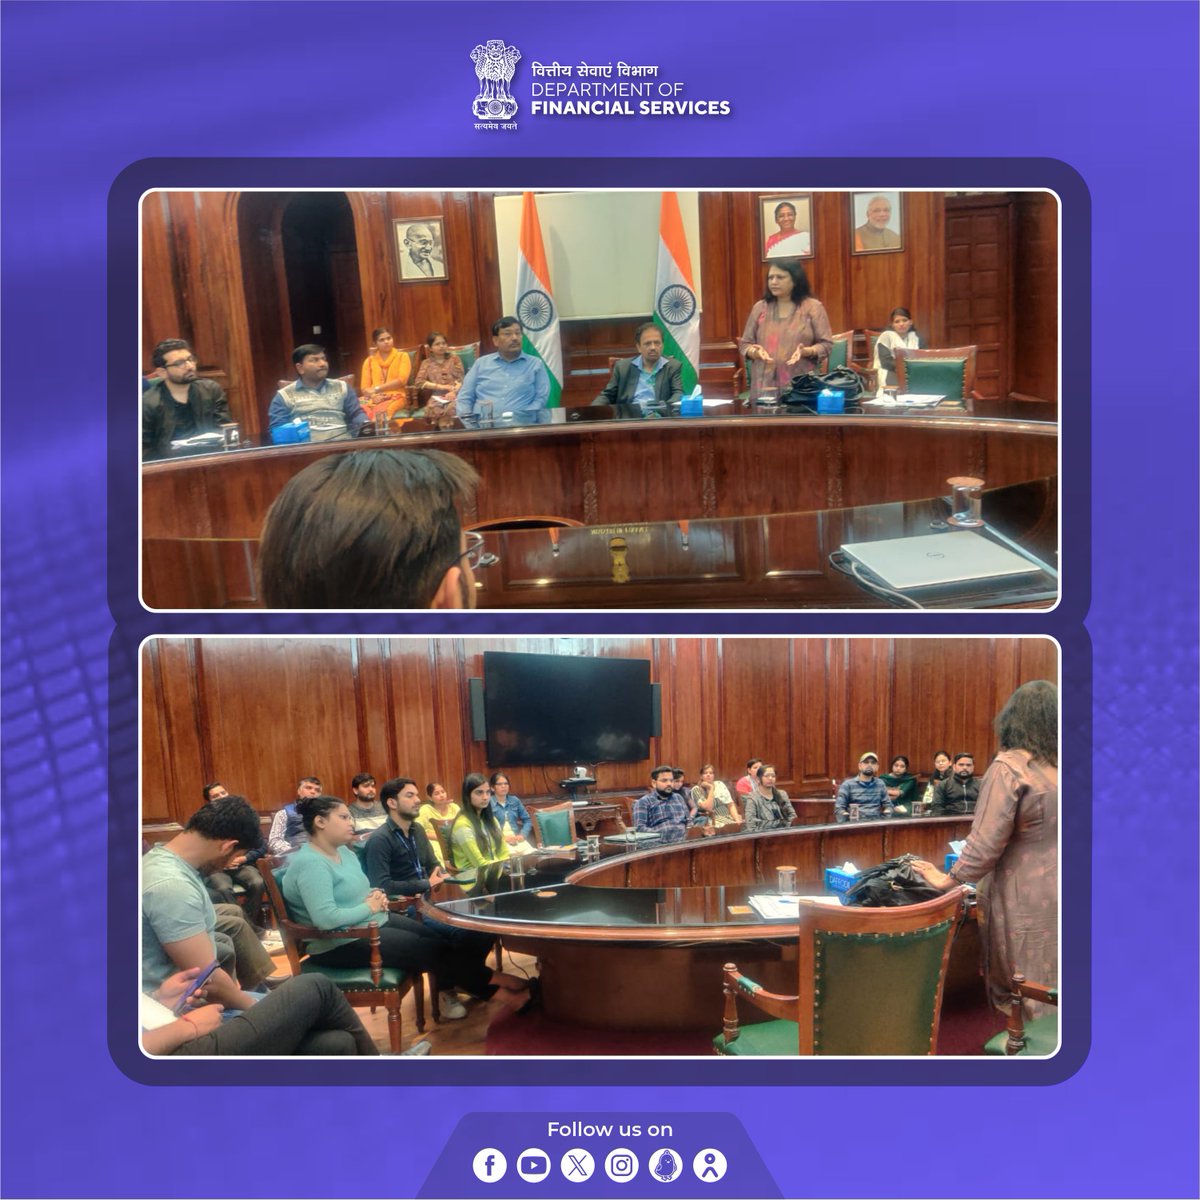 Pradhan Mantri Jeevan Jyoti Bima Yojana and Pradhan Mantri Suraksha Bima Yojana awareness campaigns were conducted by the Department of Financial Services for the staff of the Department of Economic Affairs #DEA on 13.03.2024. #DFS_India #PMJJBY #PMSBY